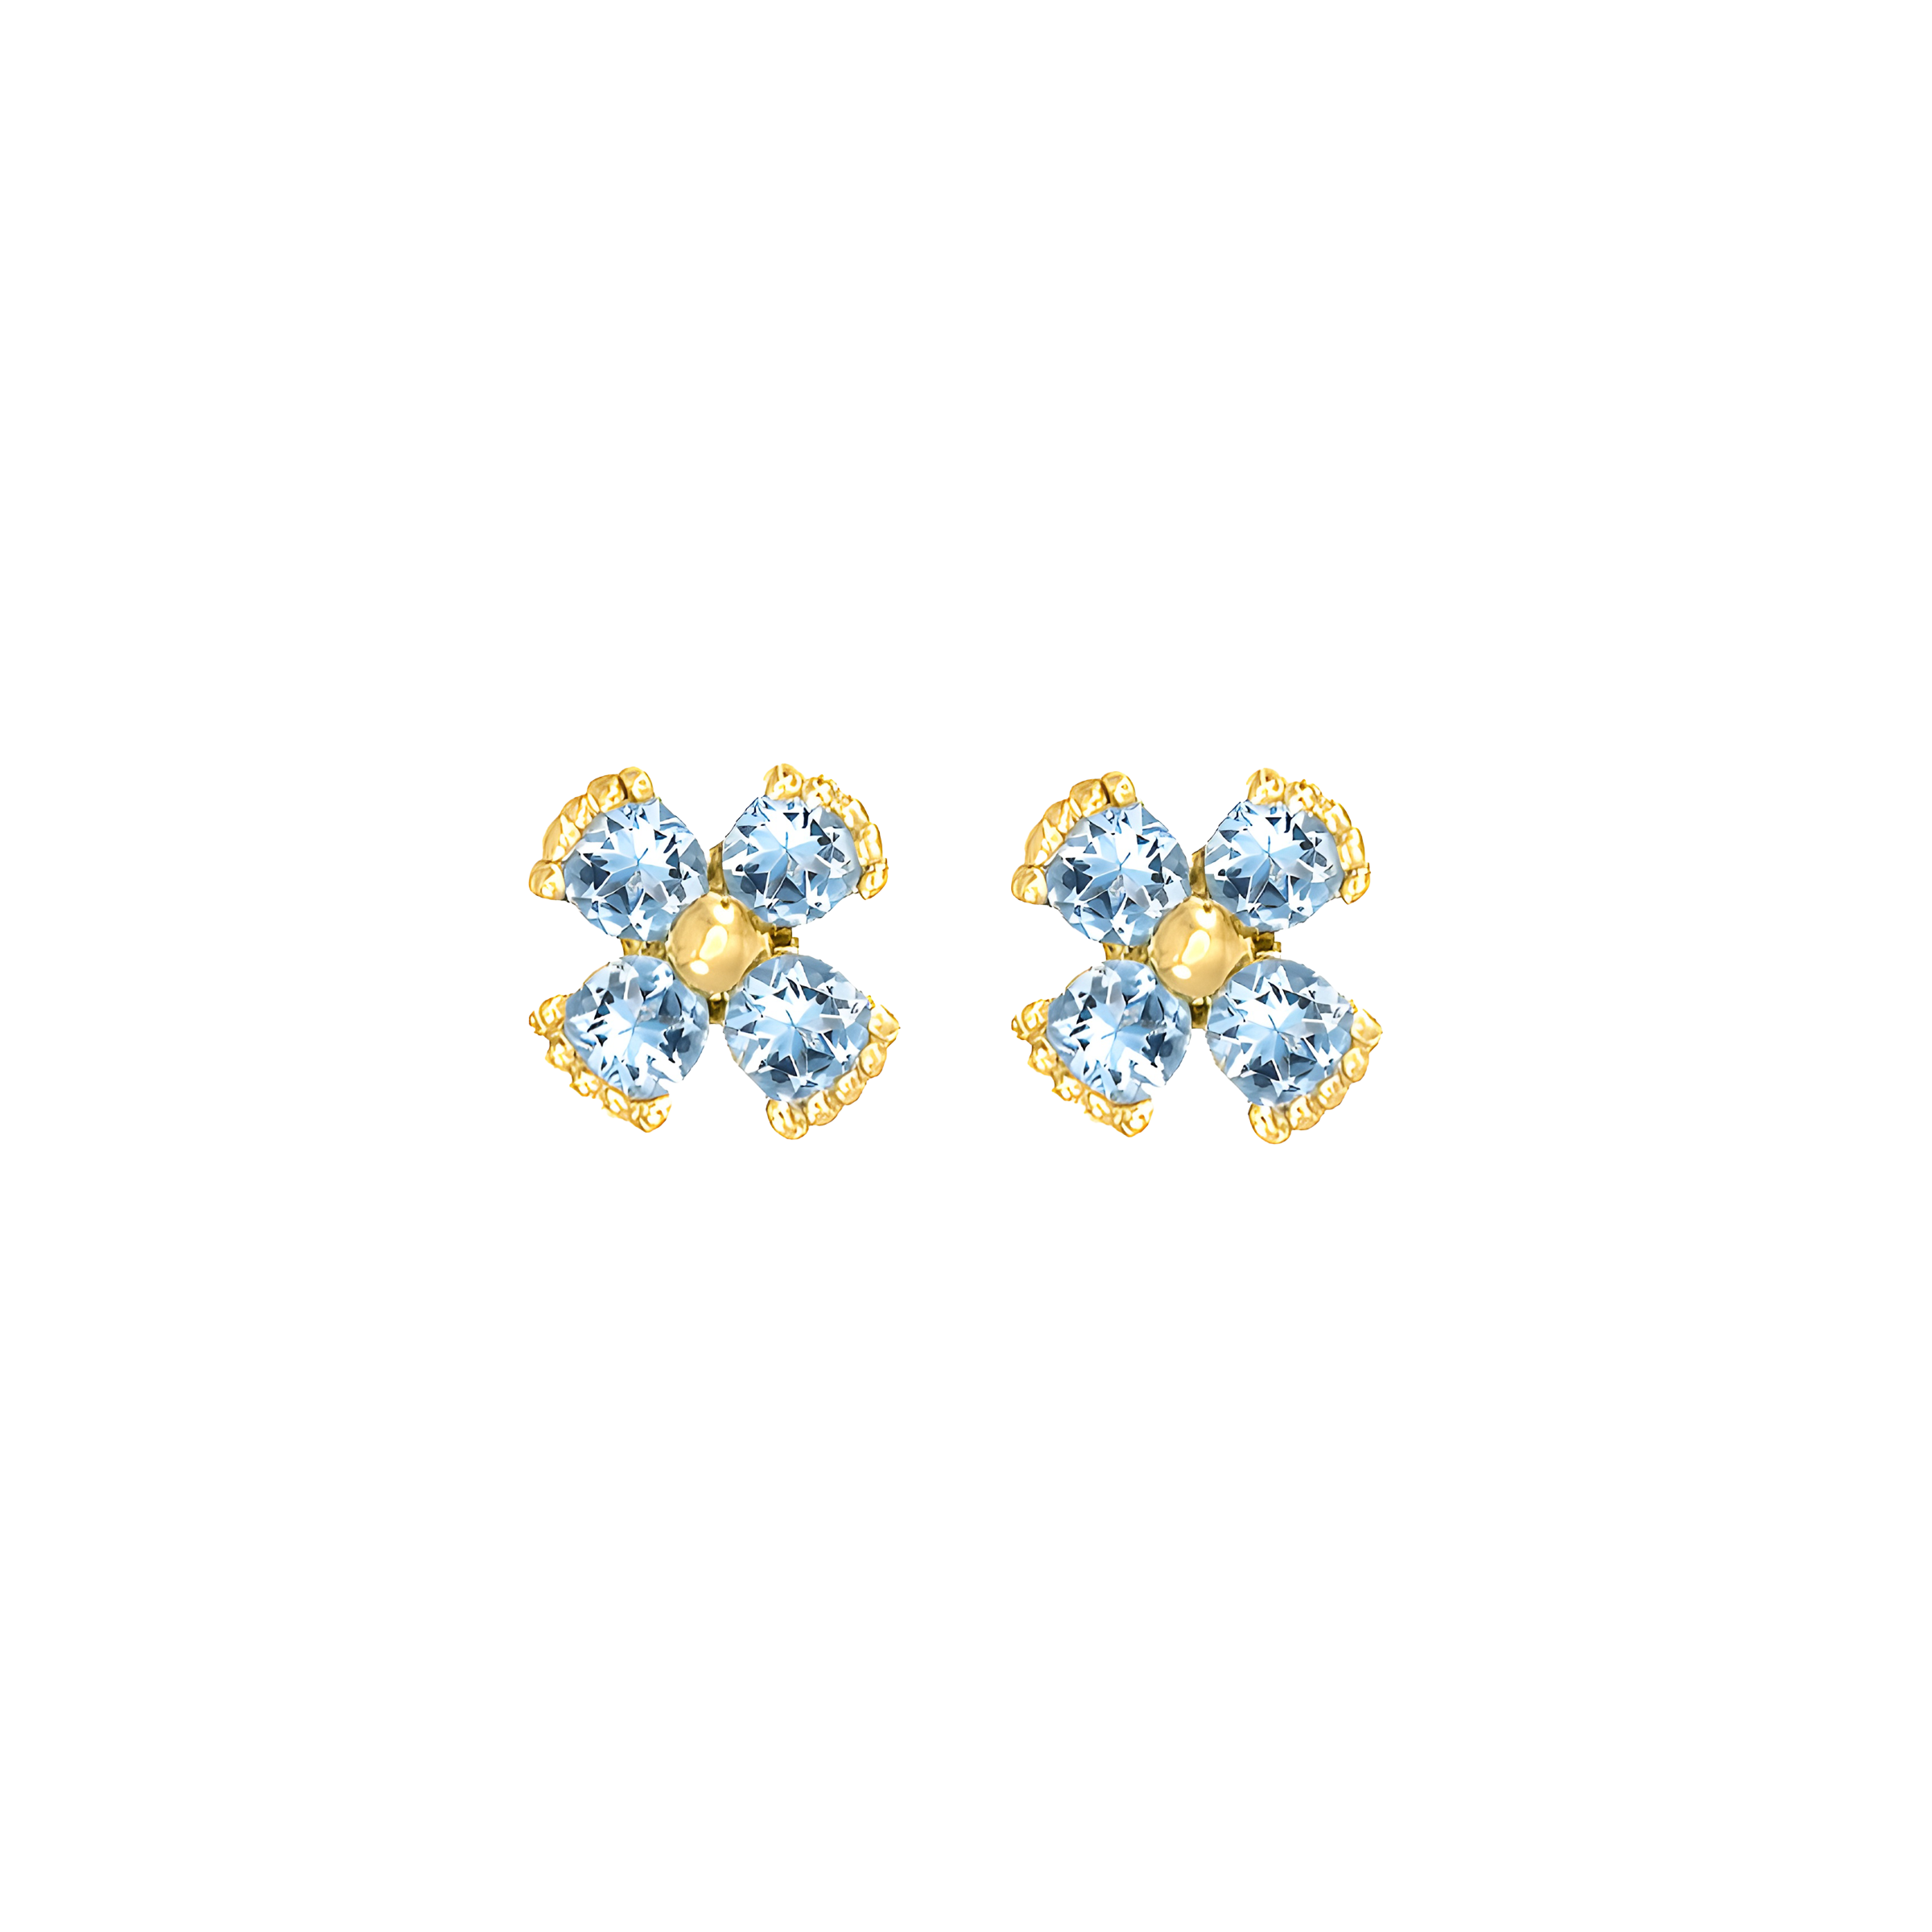 Dainty Floral Aquamarine Stud Earrings in 18k Yellow Gold